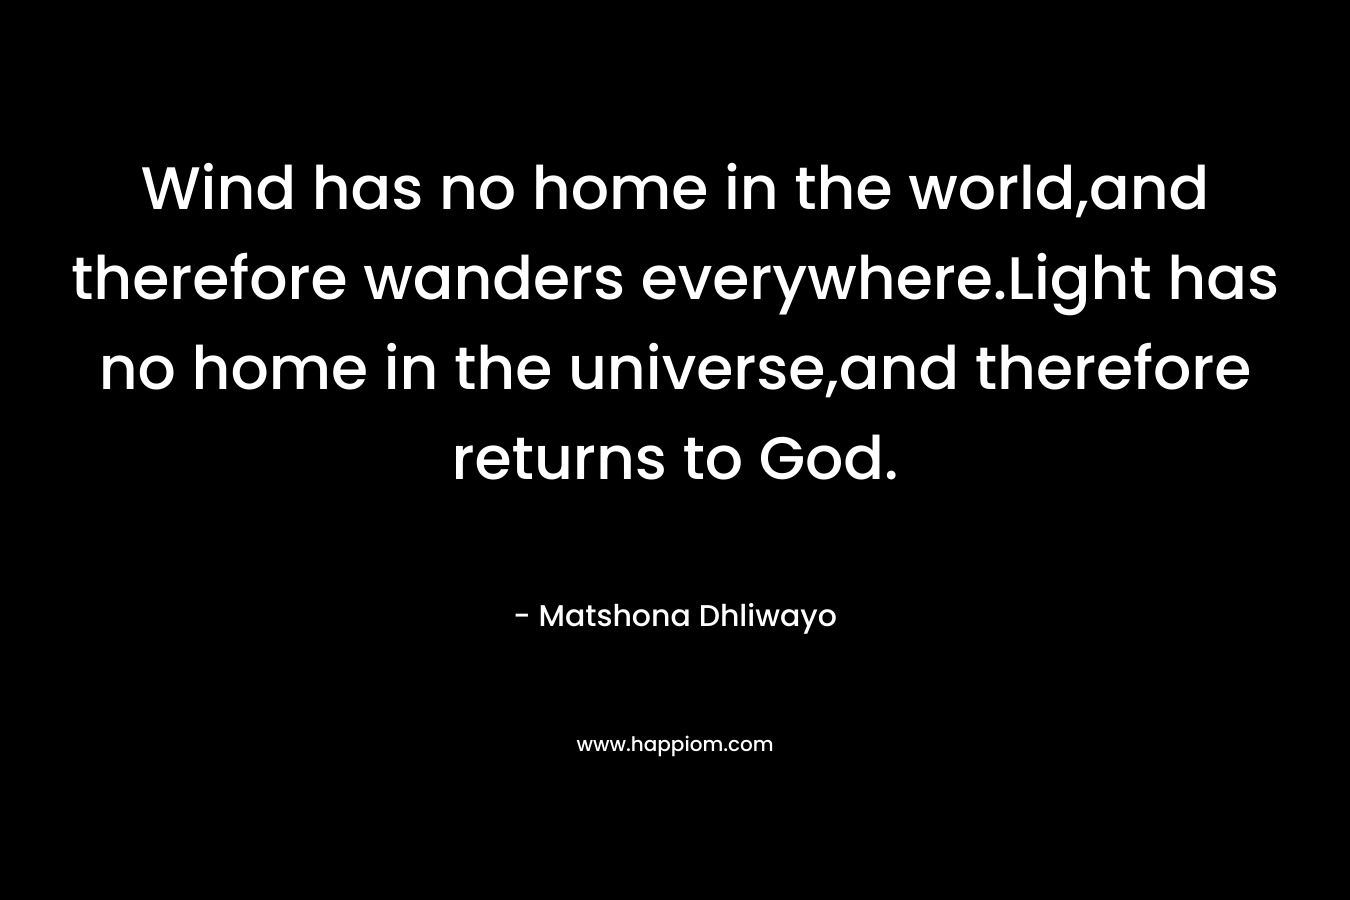 Wind has no home in the world,and therefore wanders everywhere.Light has no home in the universe,and therefore returns to God. – Matshona Dhliwayo